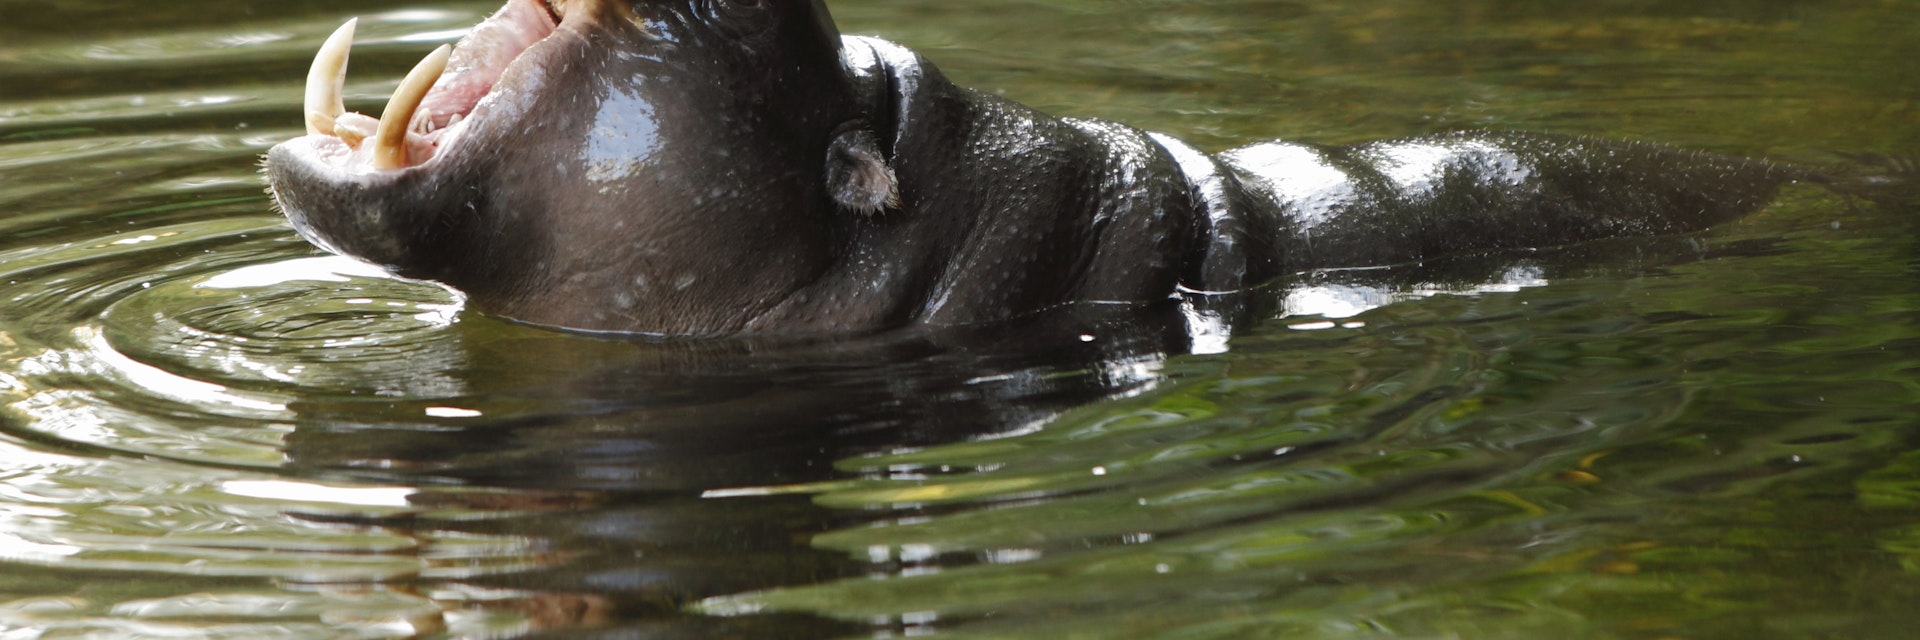 Hippo showing off its tusks